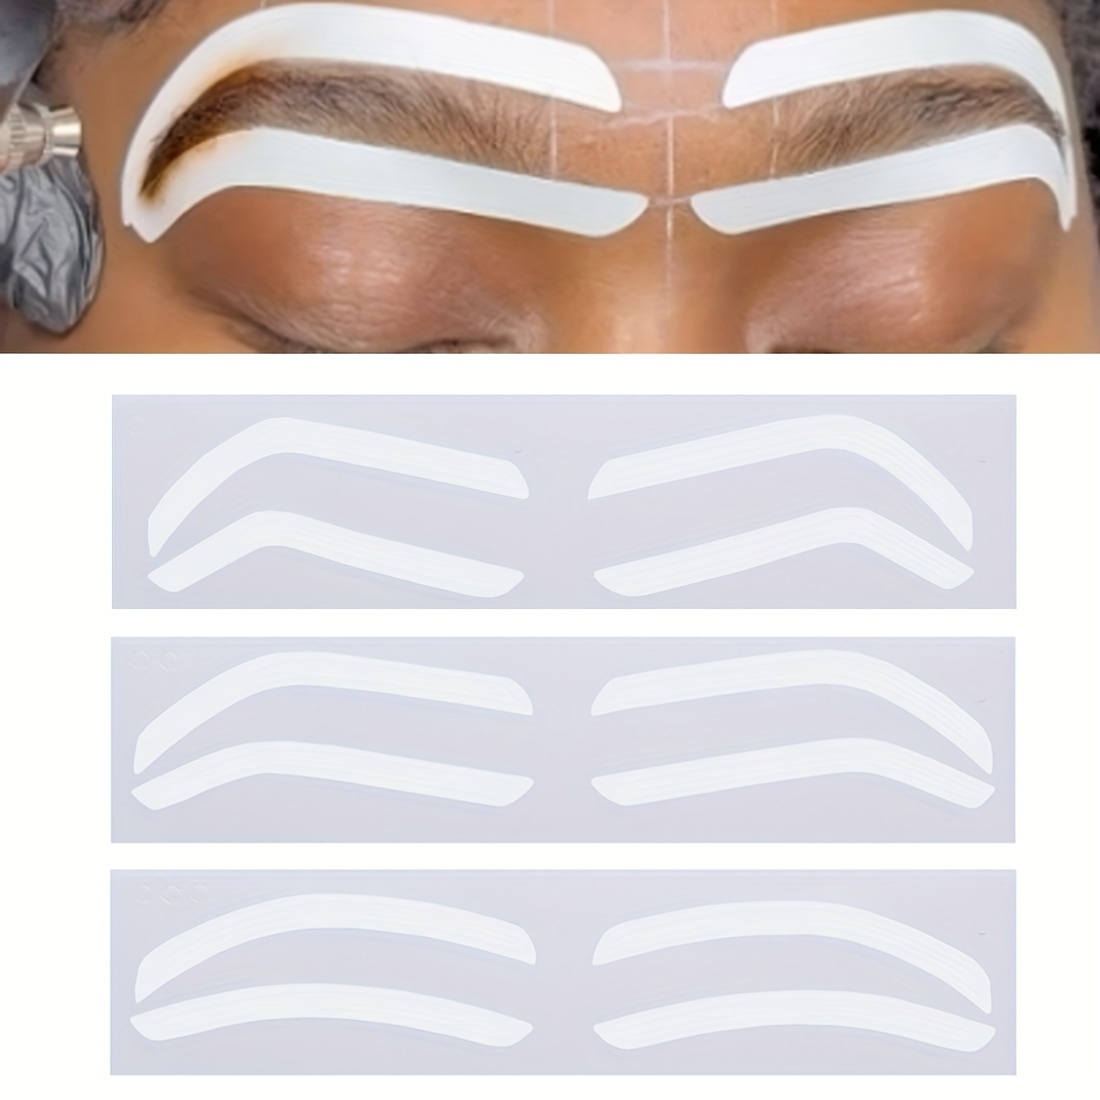 

Disposable Eyebrow Stencil Stickers - 24 Pairs Non-toxic Eyebrow Shaping And Mapping Guide Tape For Airbrush Shading And Makeup Application, 3 Shapes Variety Pack For Perfect Brow Lines, Alcohol Free